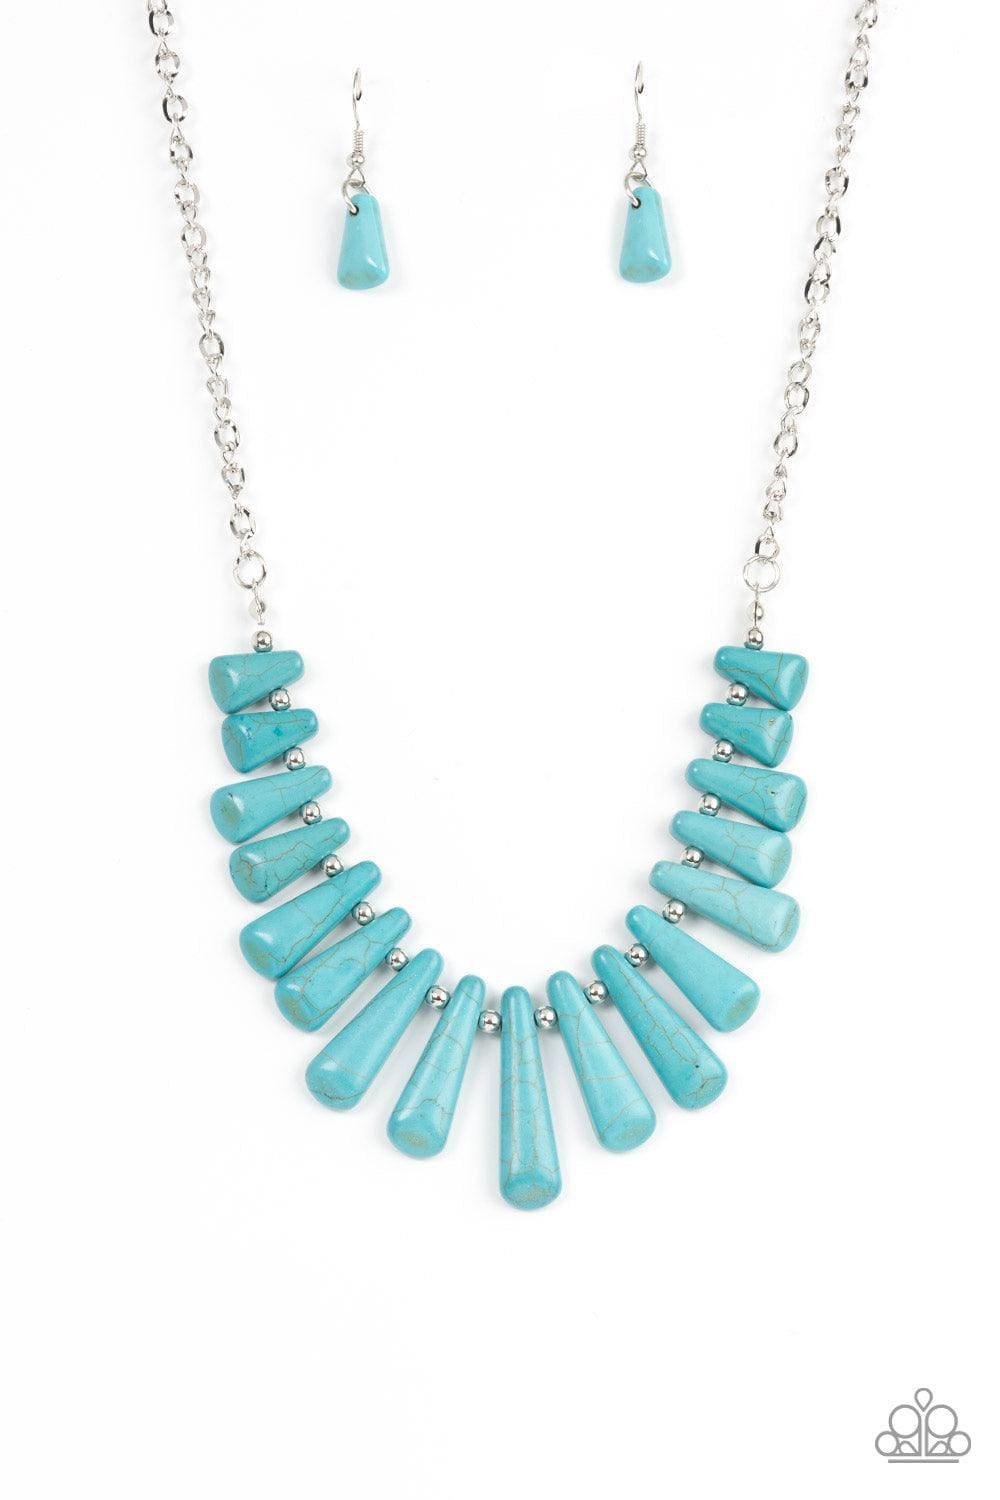 Paparazzi Accessories - Mojave Empress - Blue/turquoise Necklace - Bling by JessieK